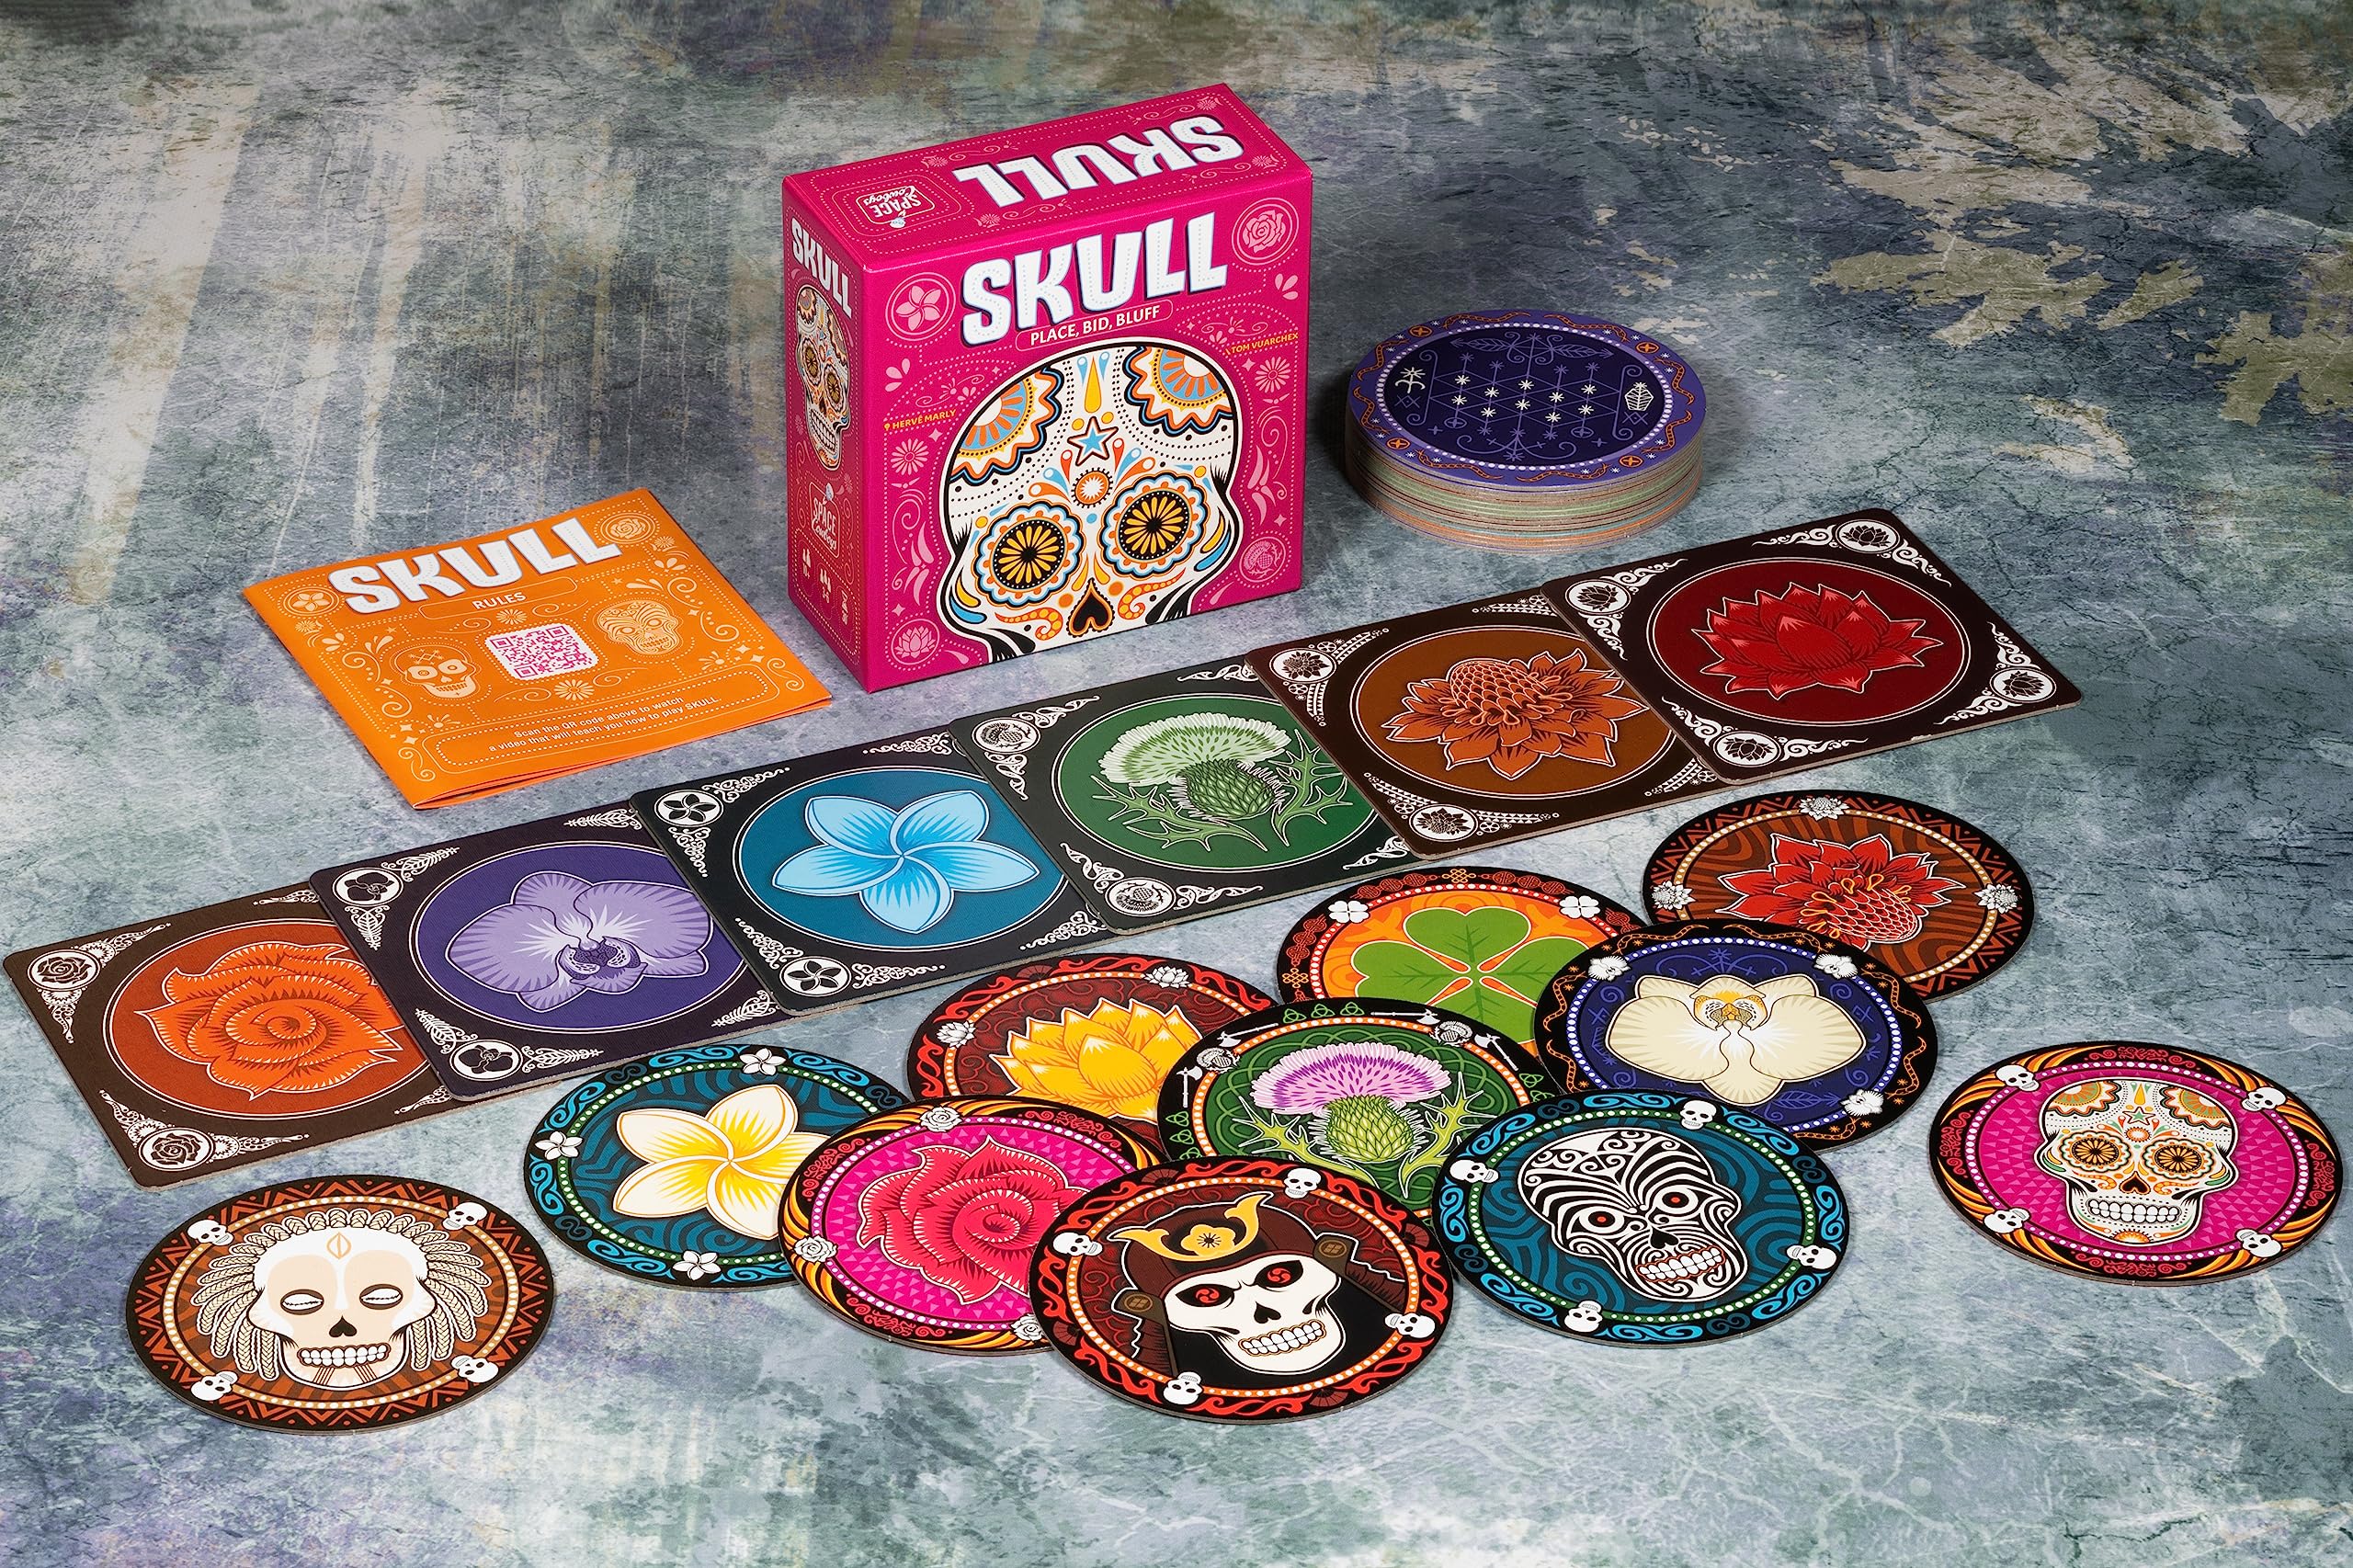 Skull Party Game | Bluffing ,Strategy, Fun for Game Night | Family Board Game for Adults and Teens | Ages 13+ | 3-6 Players | Average Playtime 30 Minutes | Made by Space Cowboys